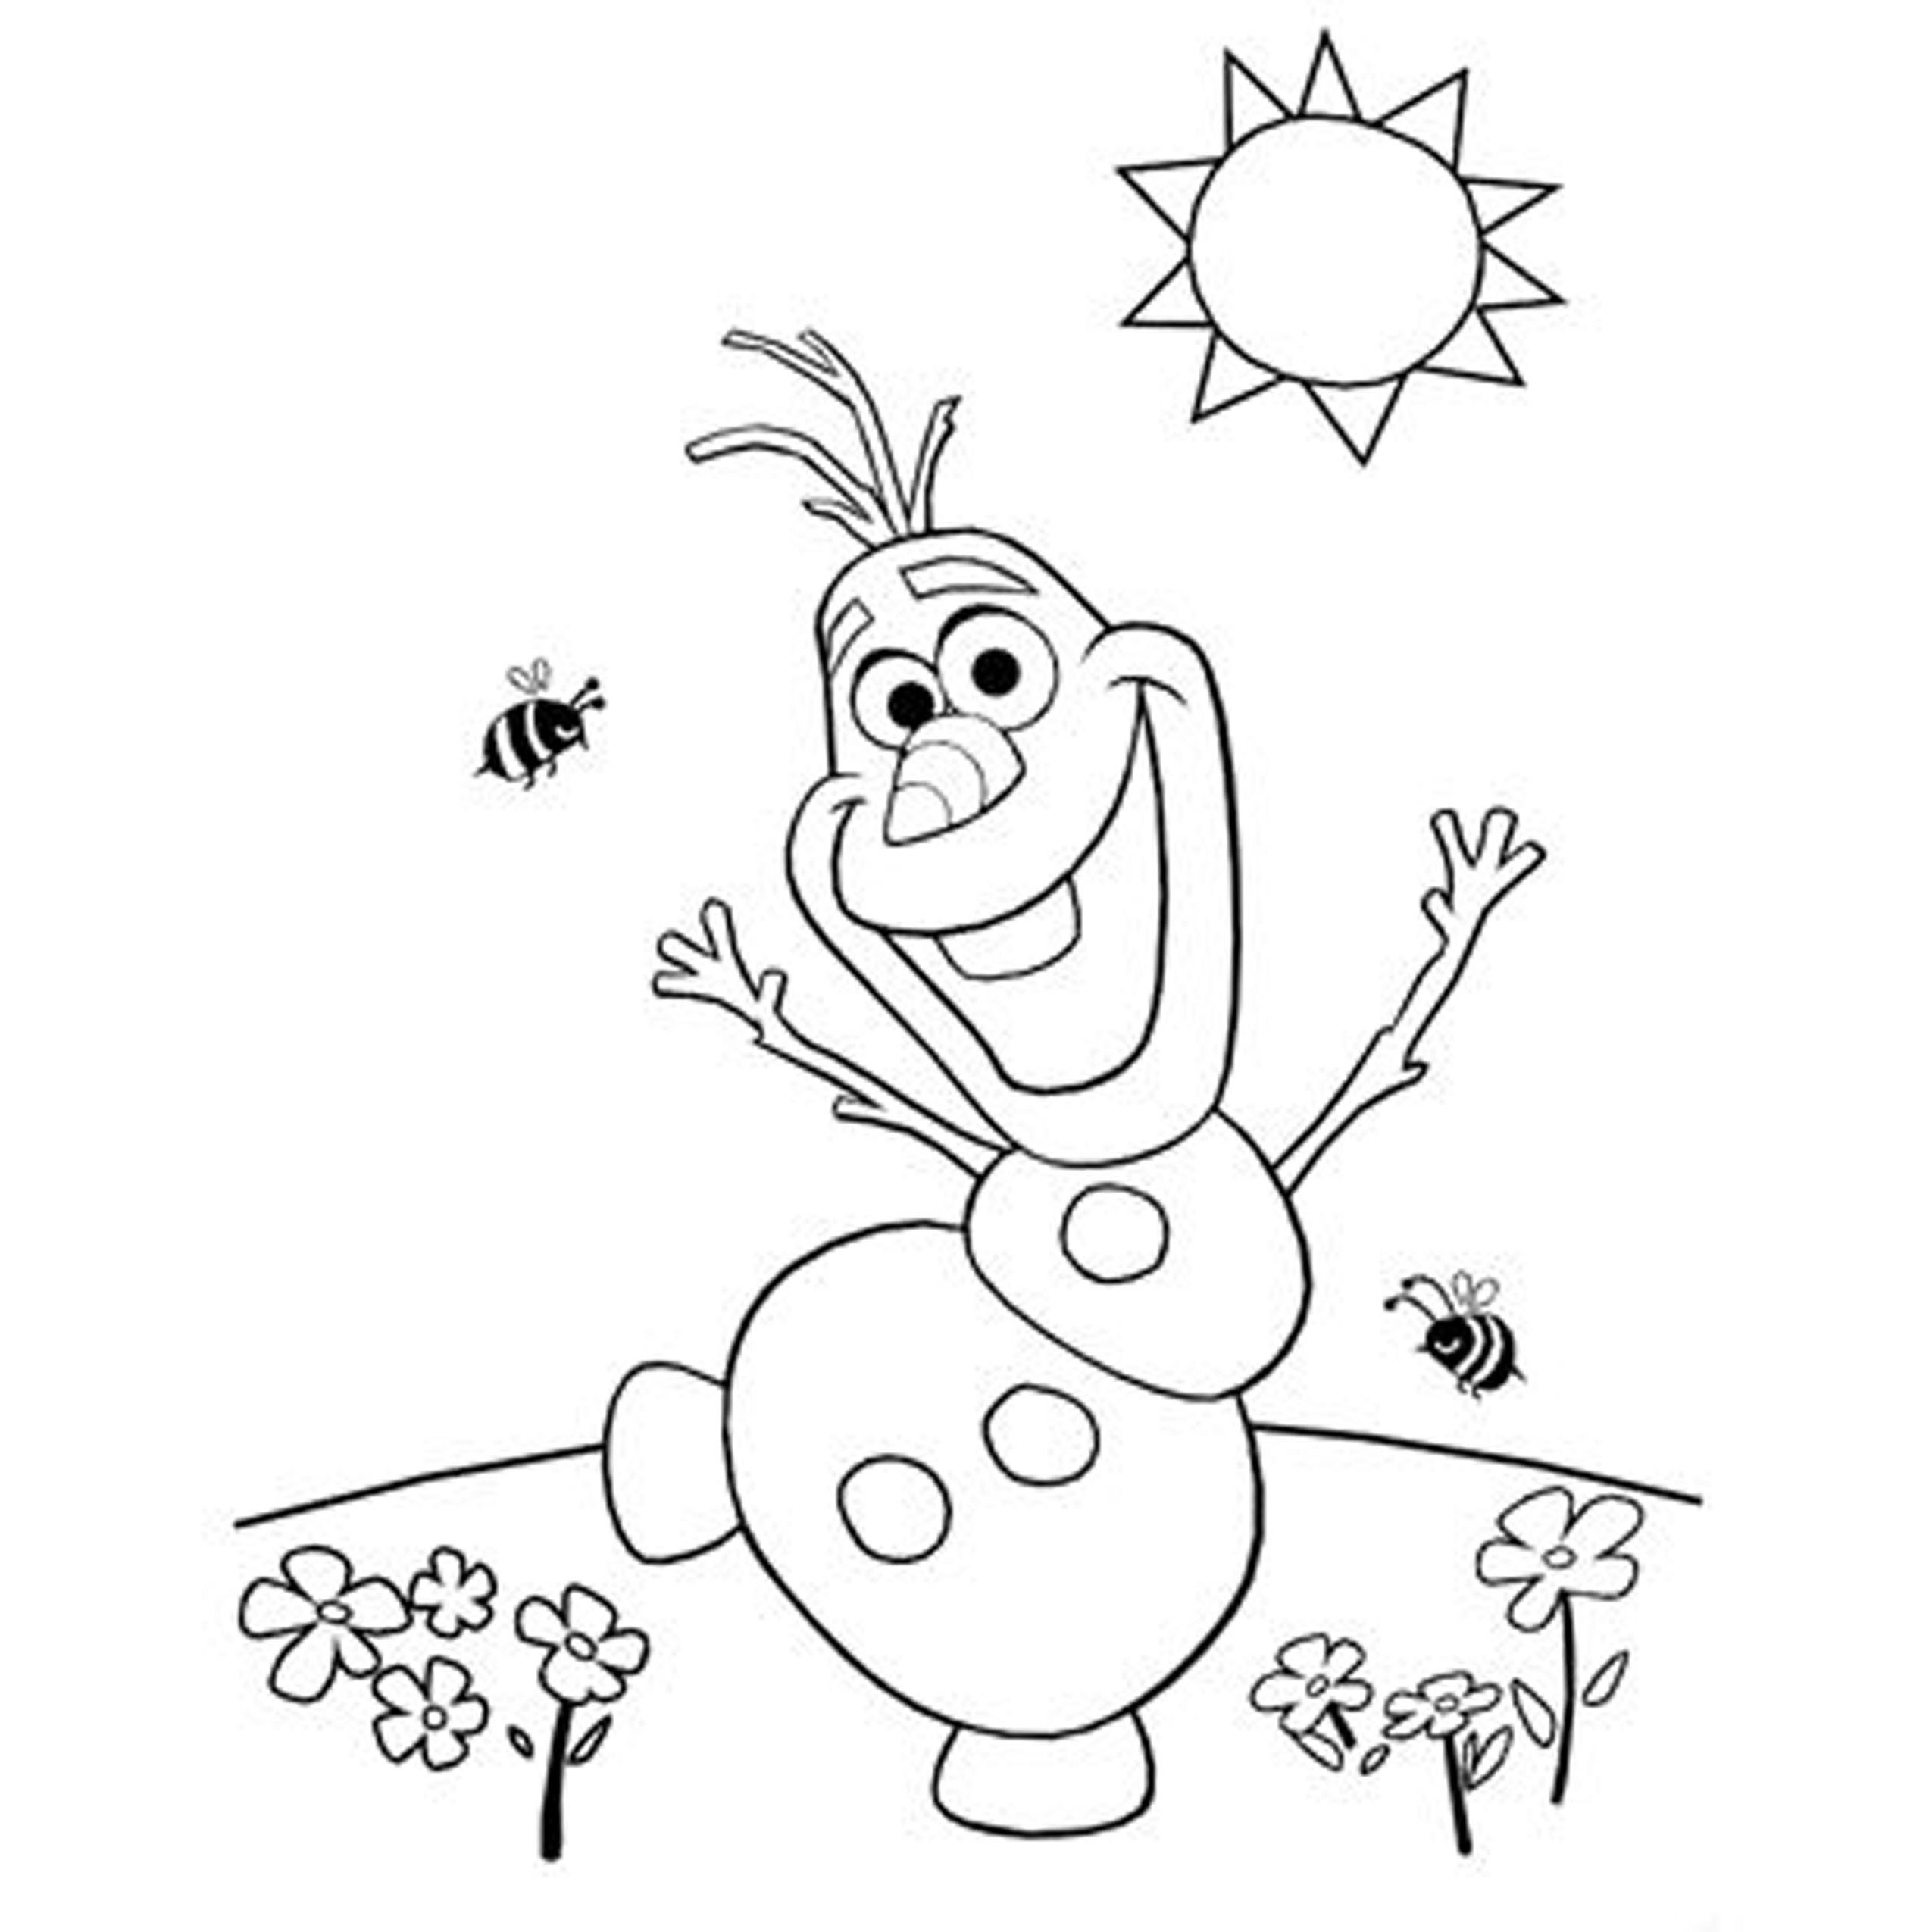 olaf clipart coloring